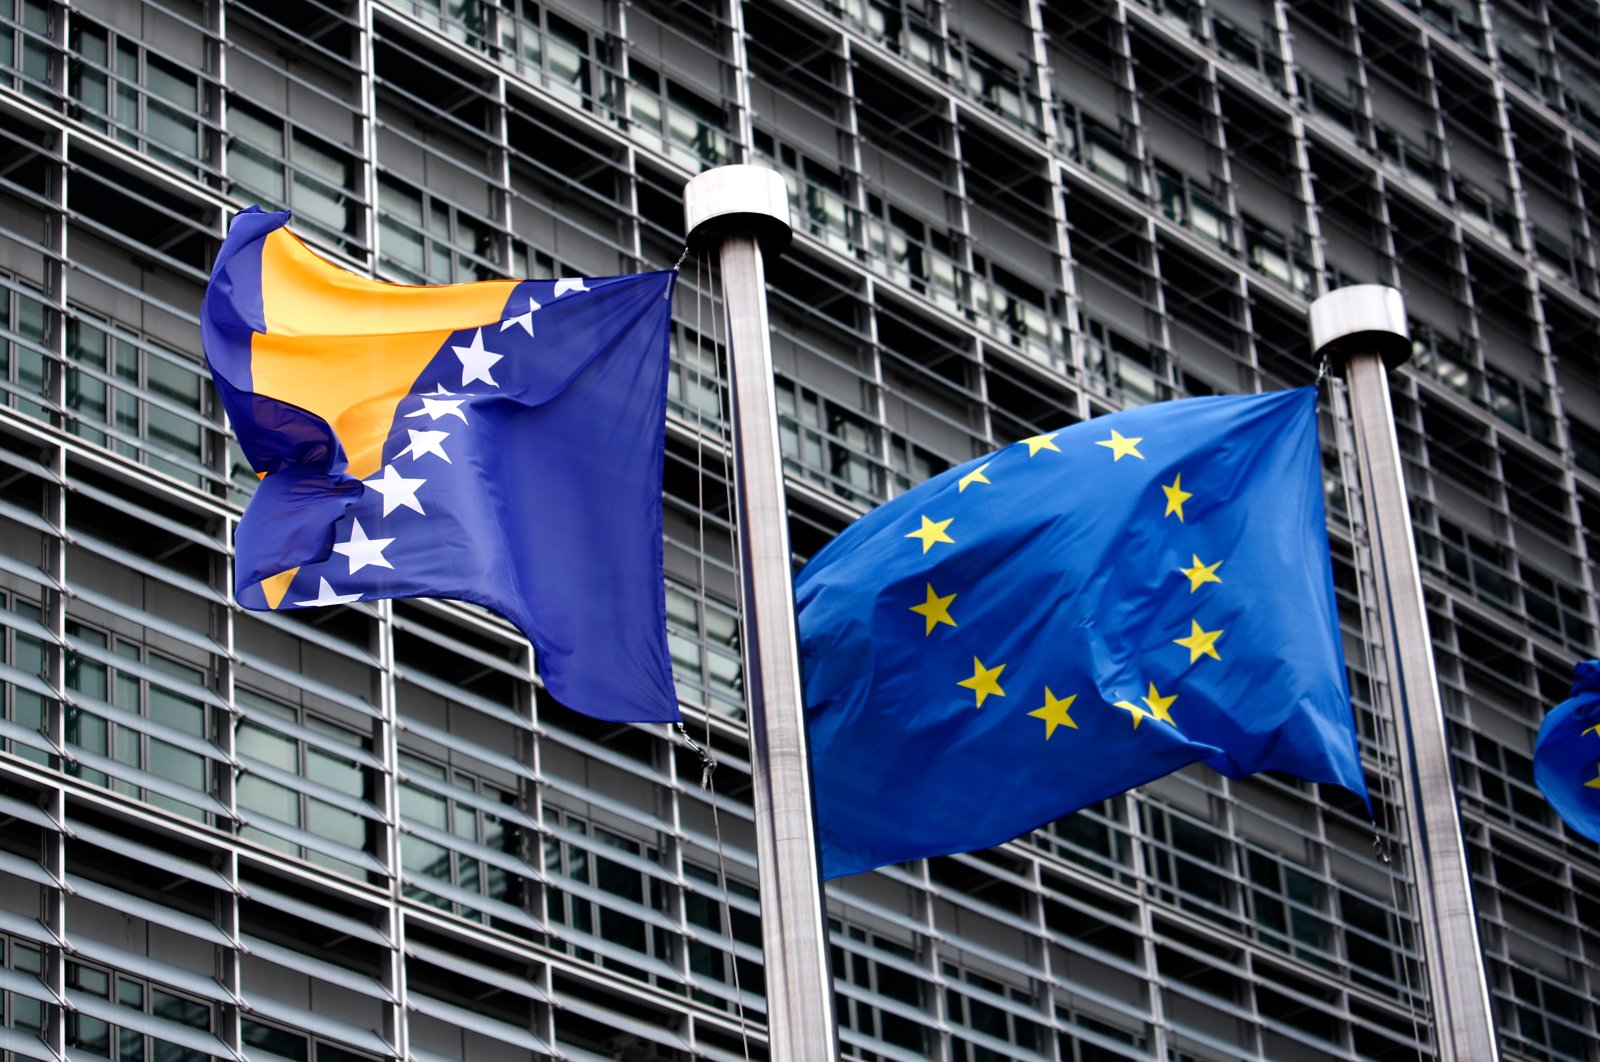 Flags of the EU and Bosnia and Herzegovina wave outside of the European Commission, Brussels, Belgium. March 4, 2019. (Shutterstock Photo)